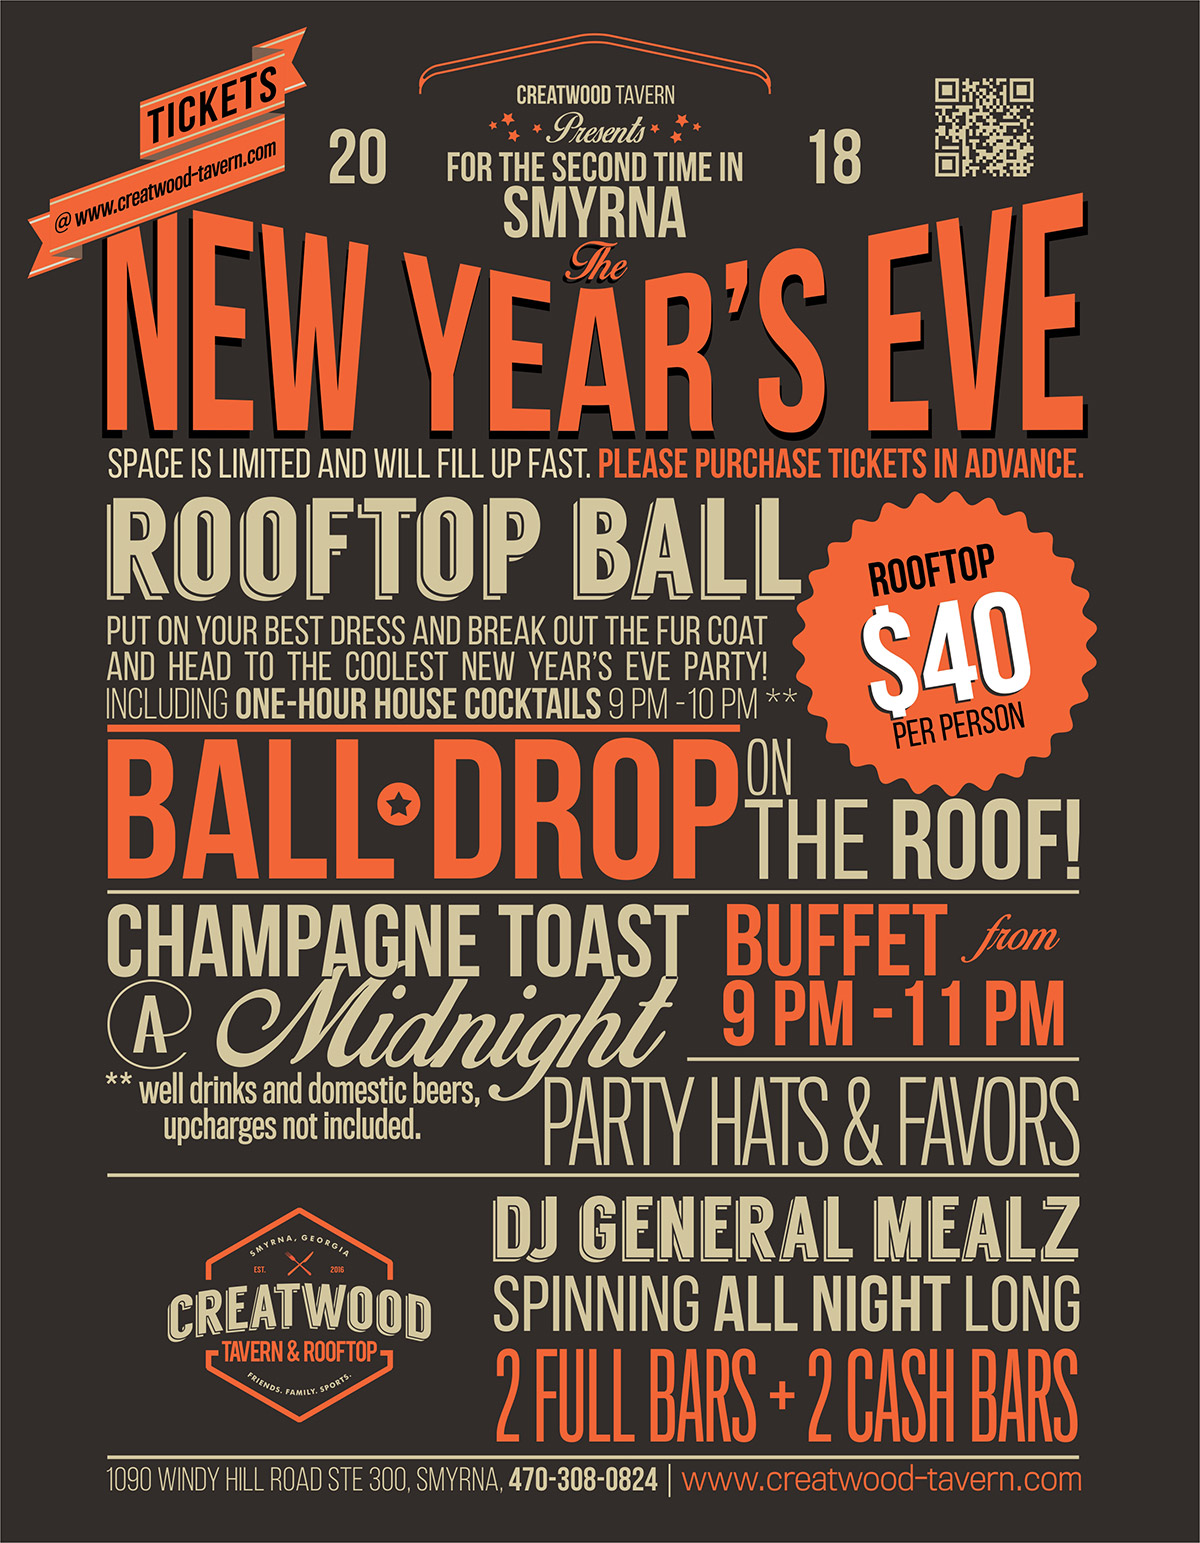 New Year's Eve Rooftop Ball Drop!